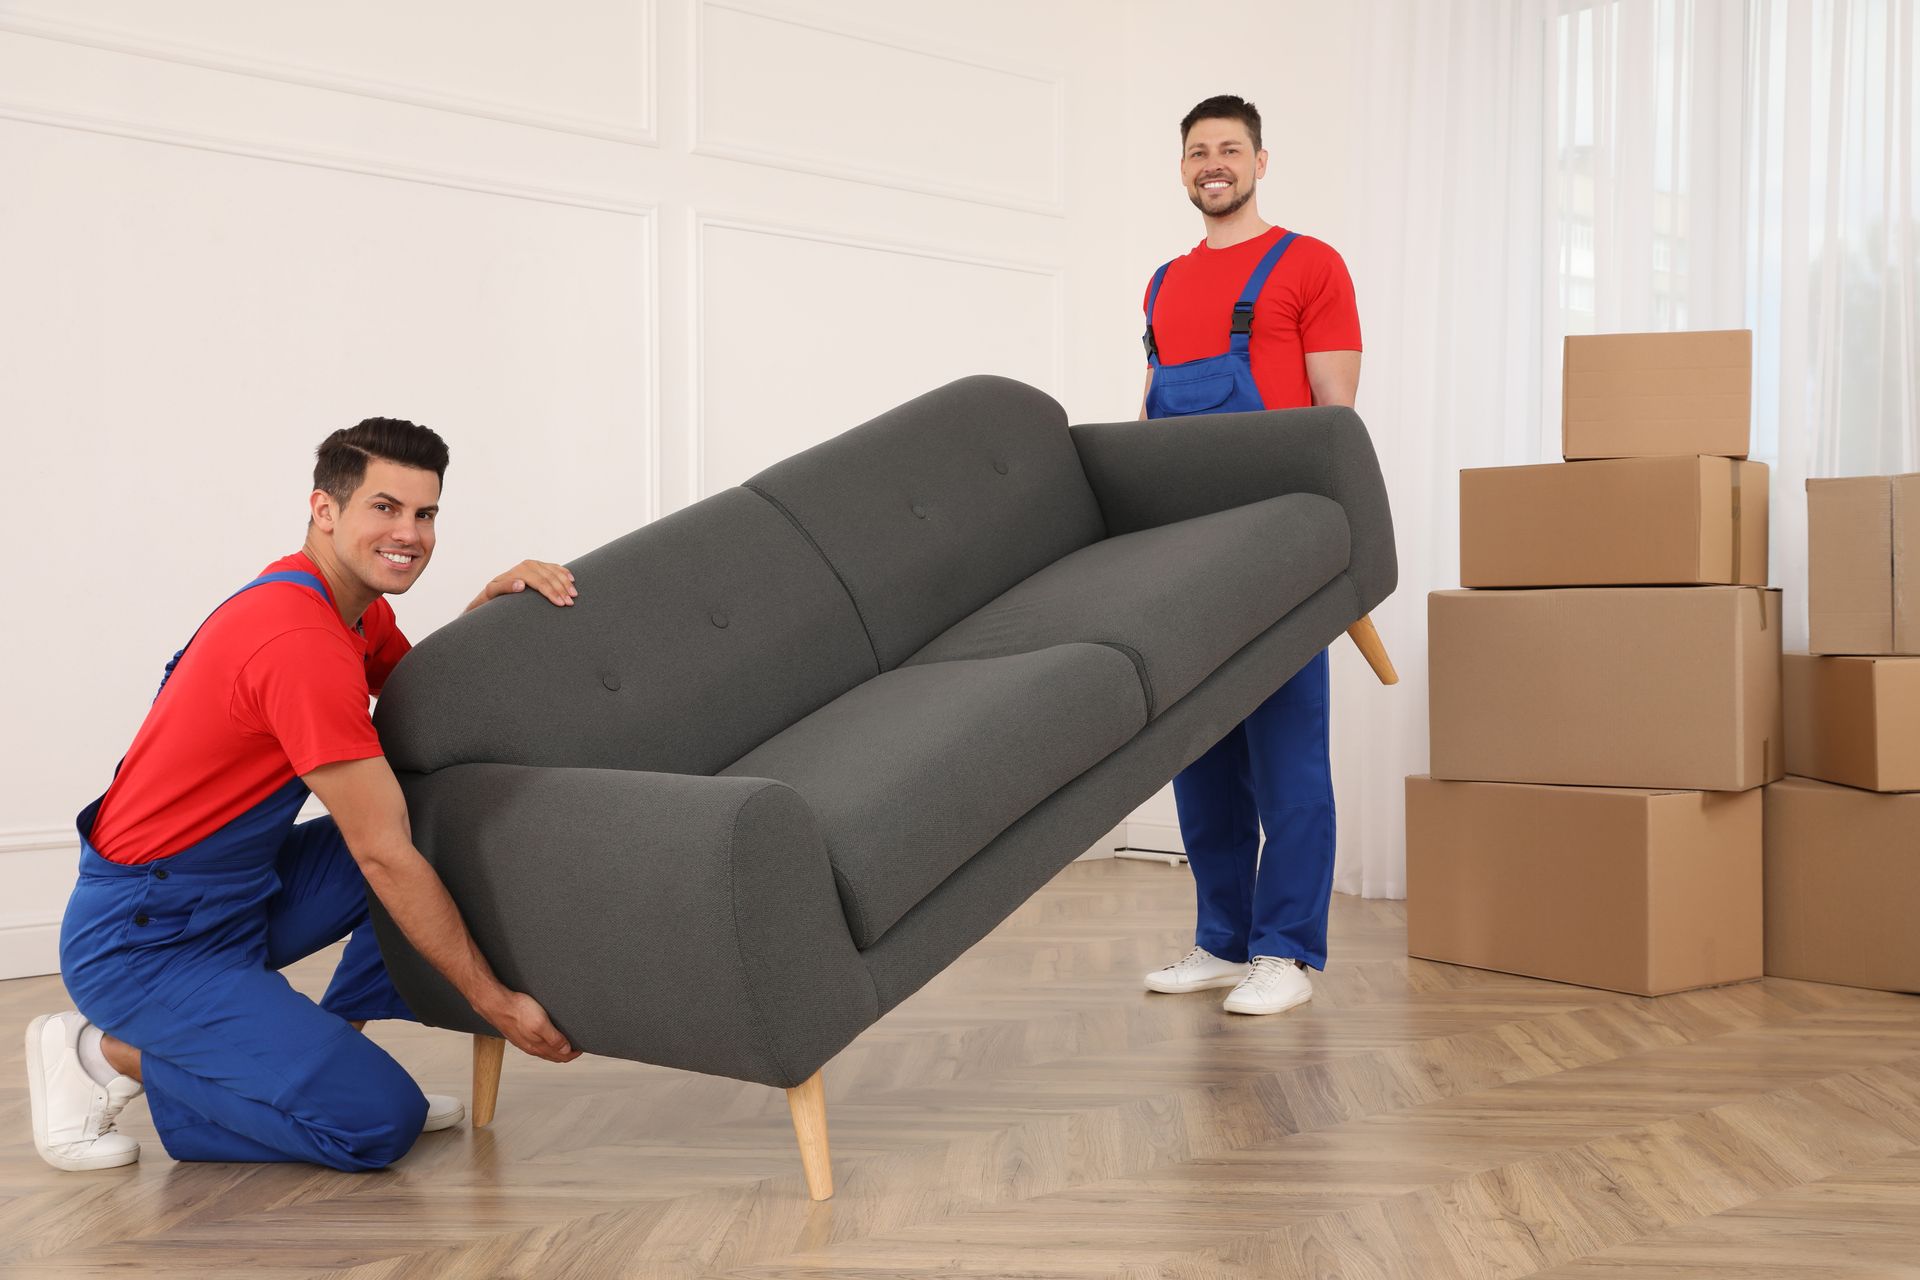 two men are moving a couch in a room filled with cardboard boxes